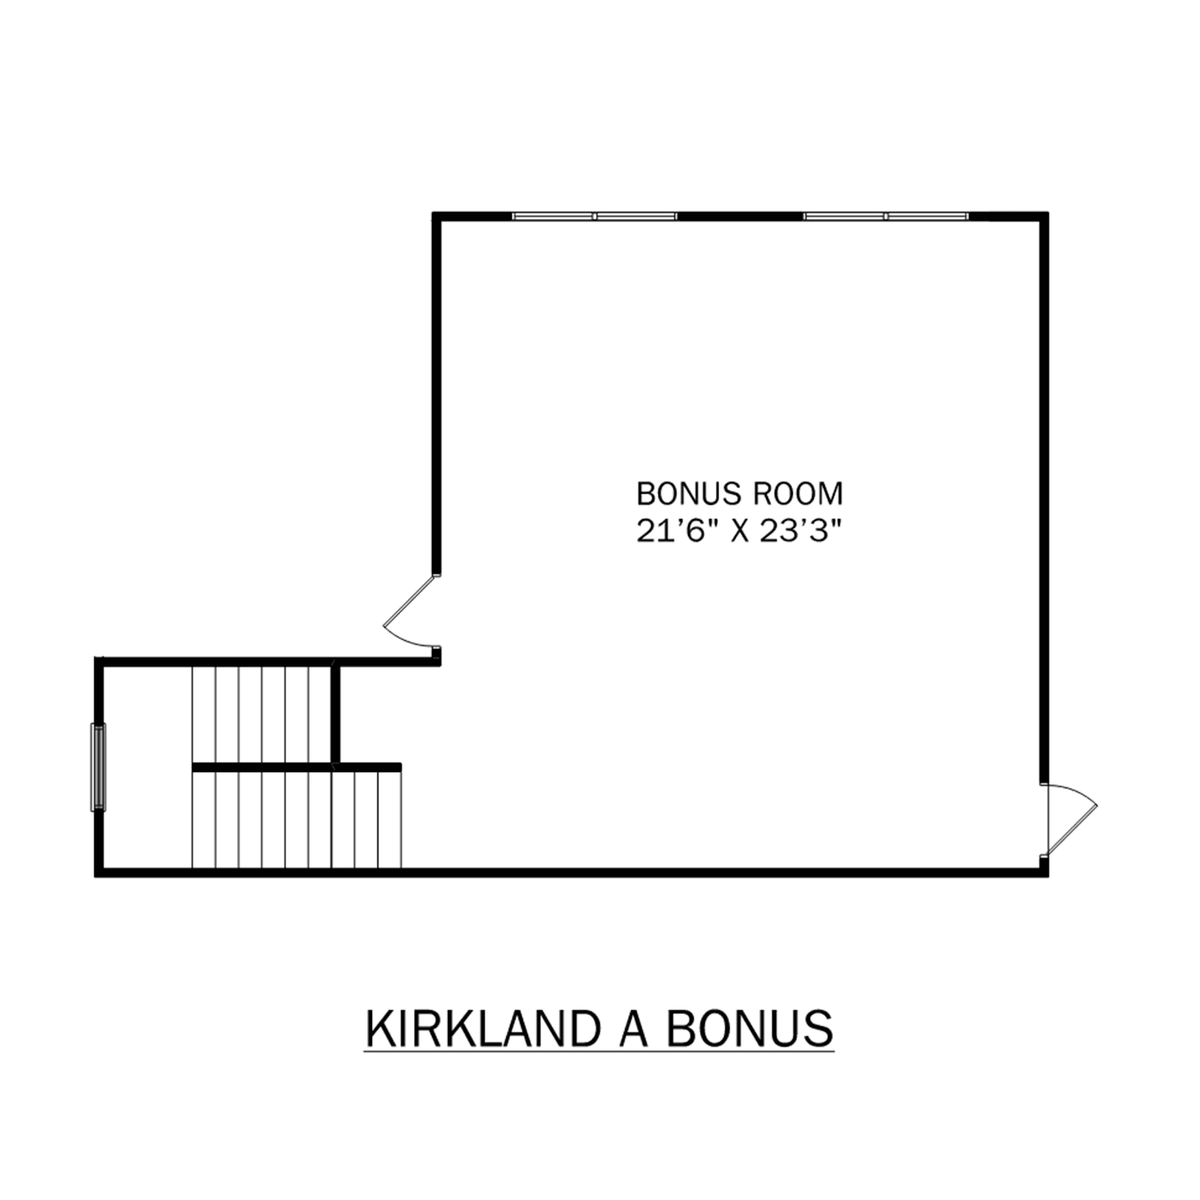 2 - The Kirkland with Bonus floor plan layout for 604 Ronnie Drive SE in Davidson Homes' Cain Park community.